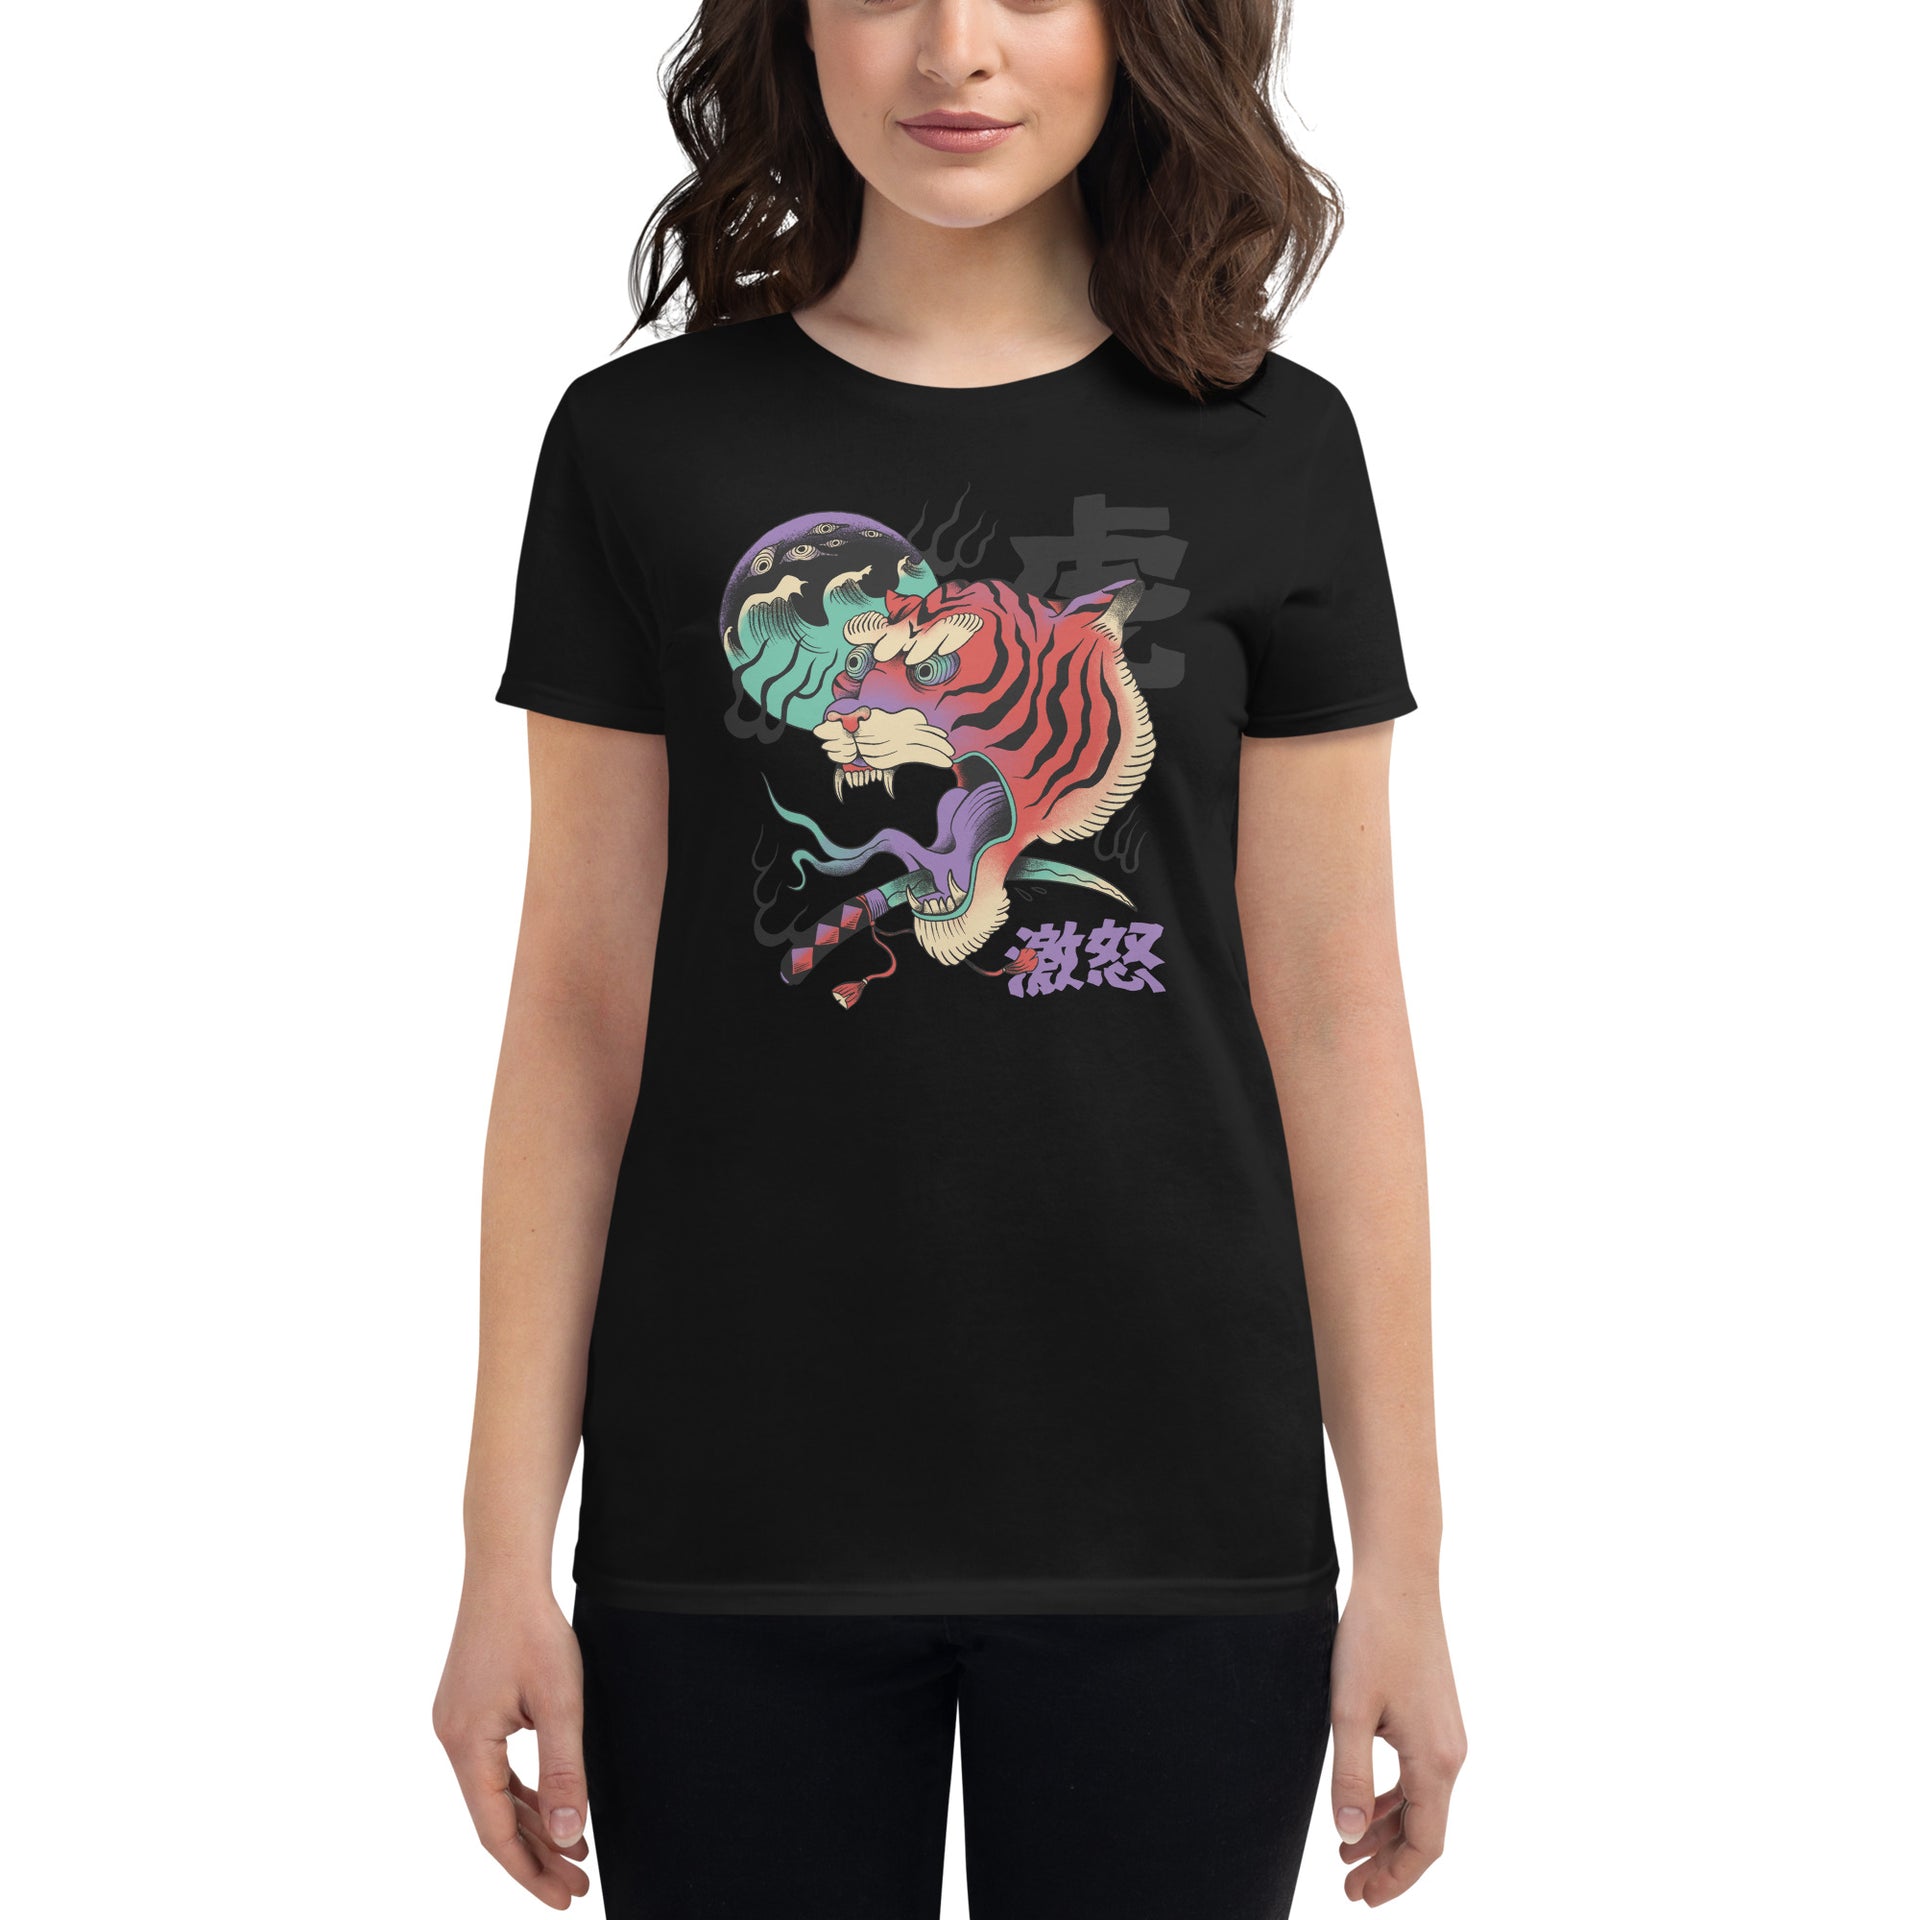 Japanese Psychedelic Tiger Women's T-Shirt